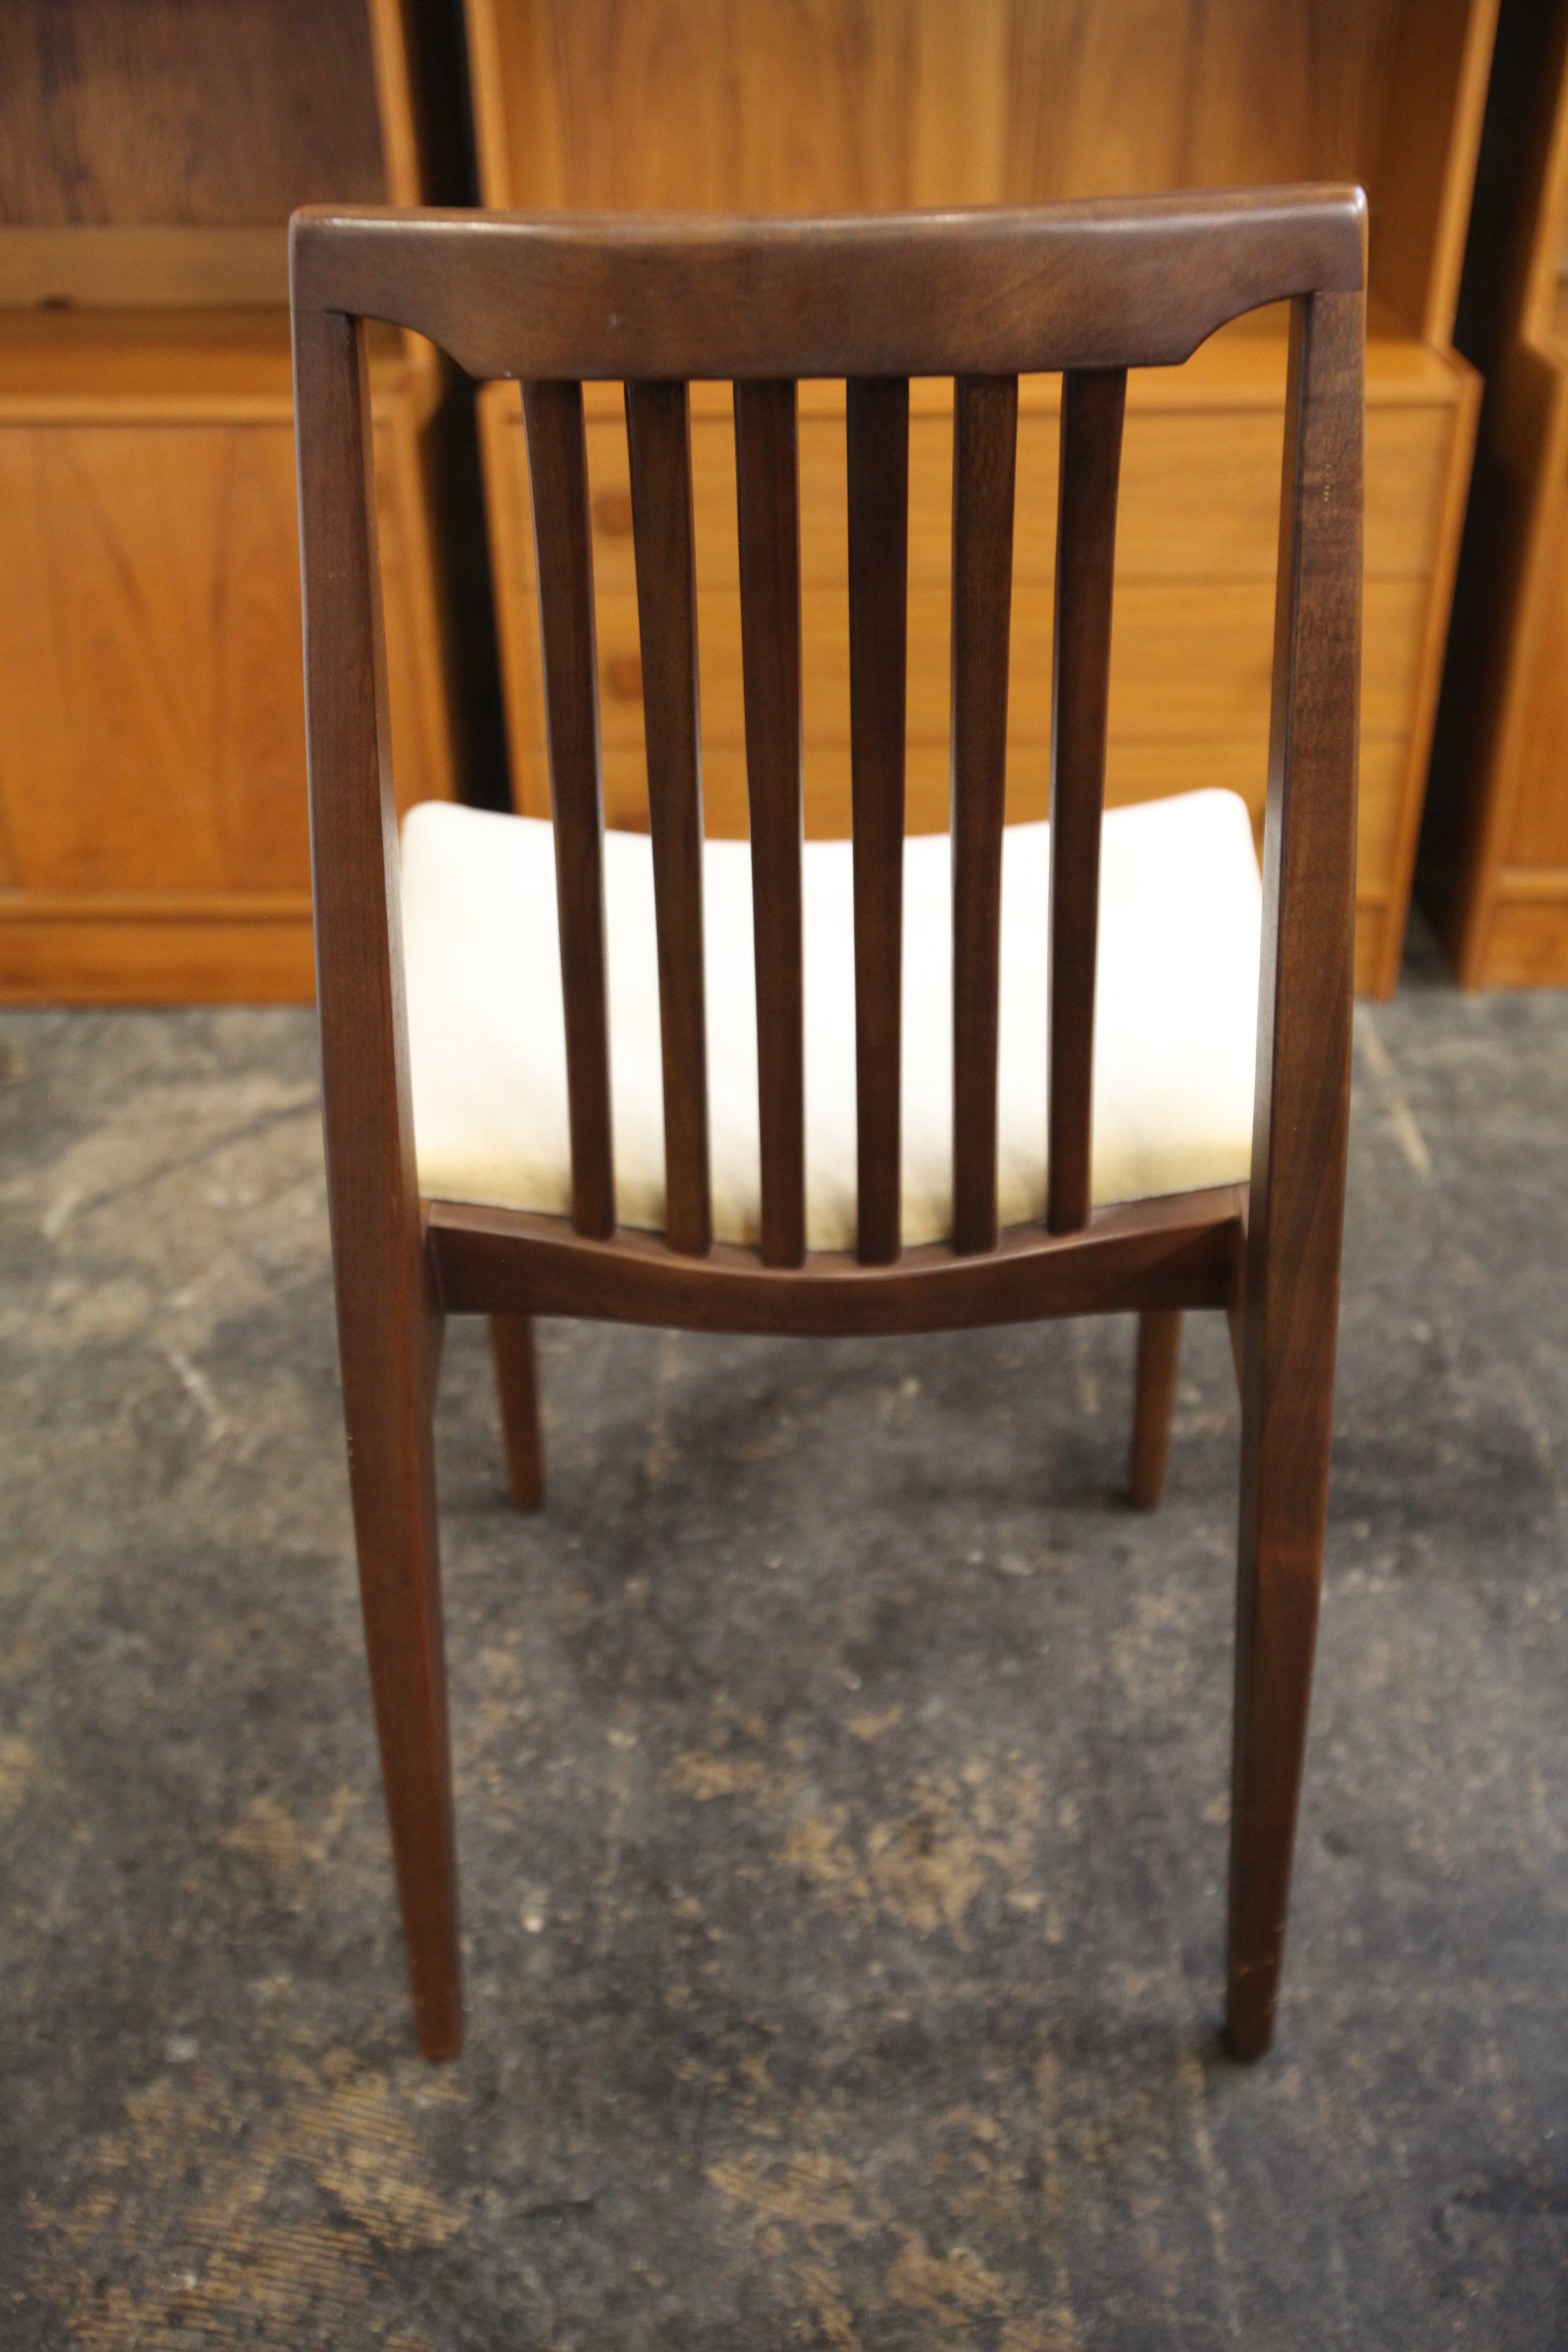 Set of 4 Vintage Honderich Walnut Dining Chairs (19"W x 34.25"H x 18"D)